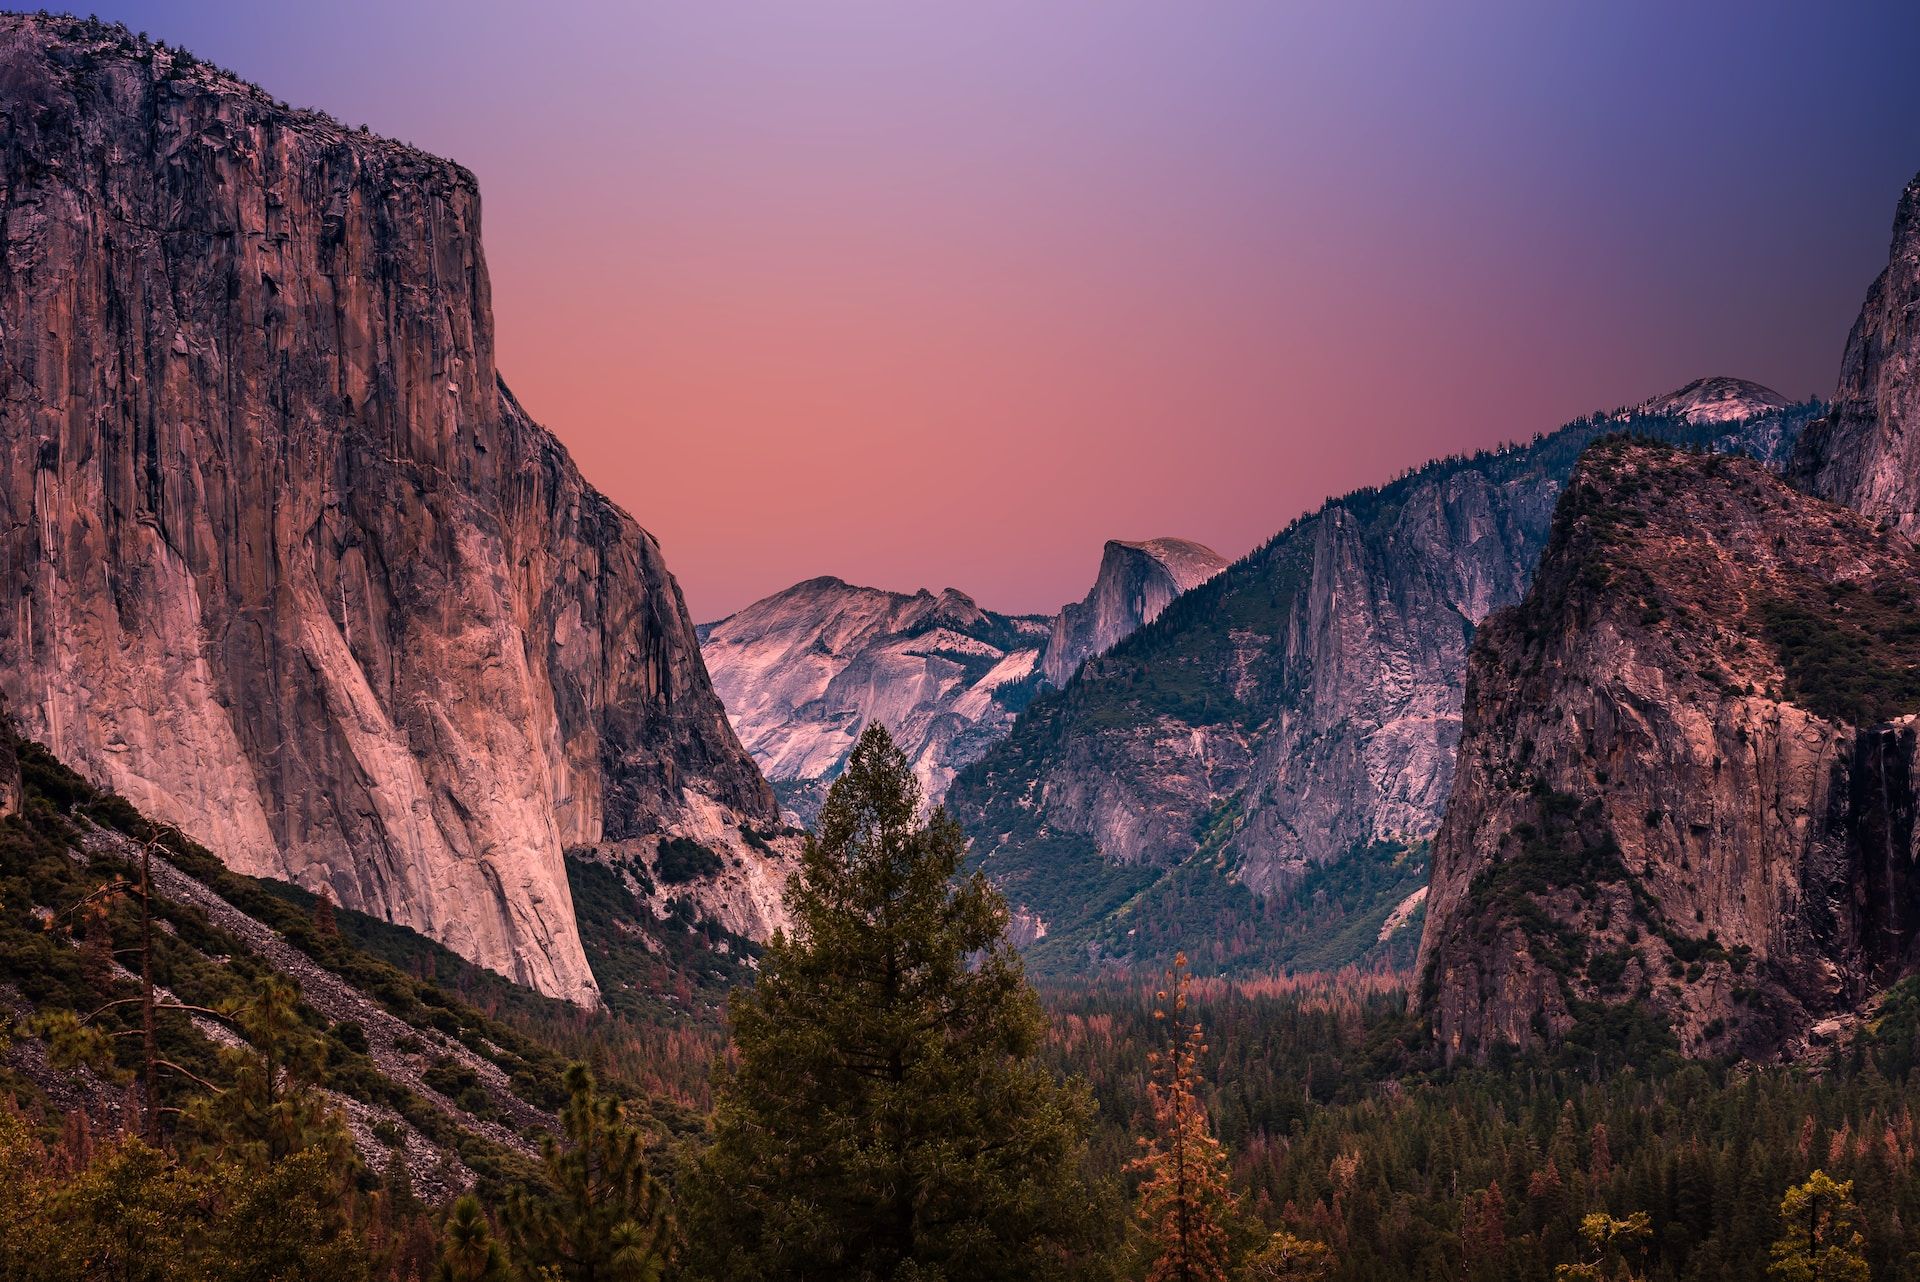 Pink and purple skies over Yosemite National Park